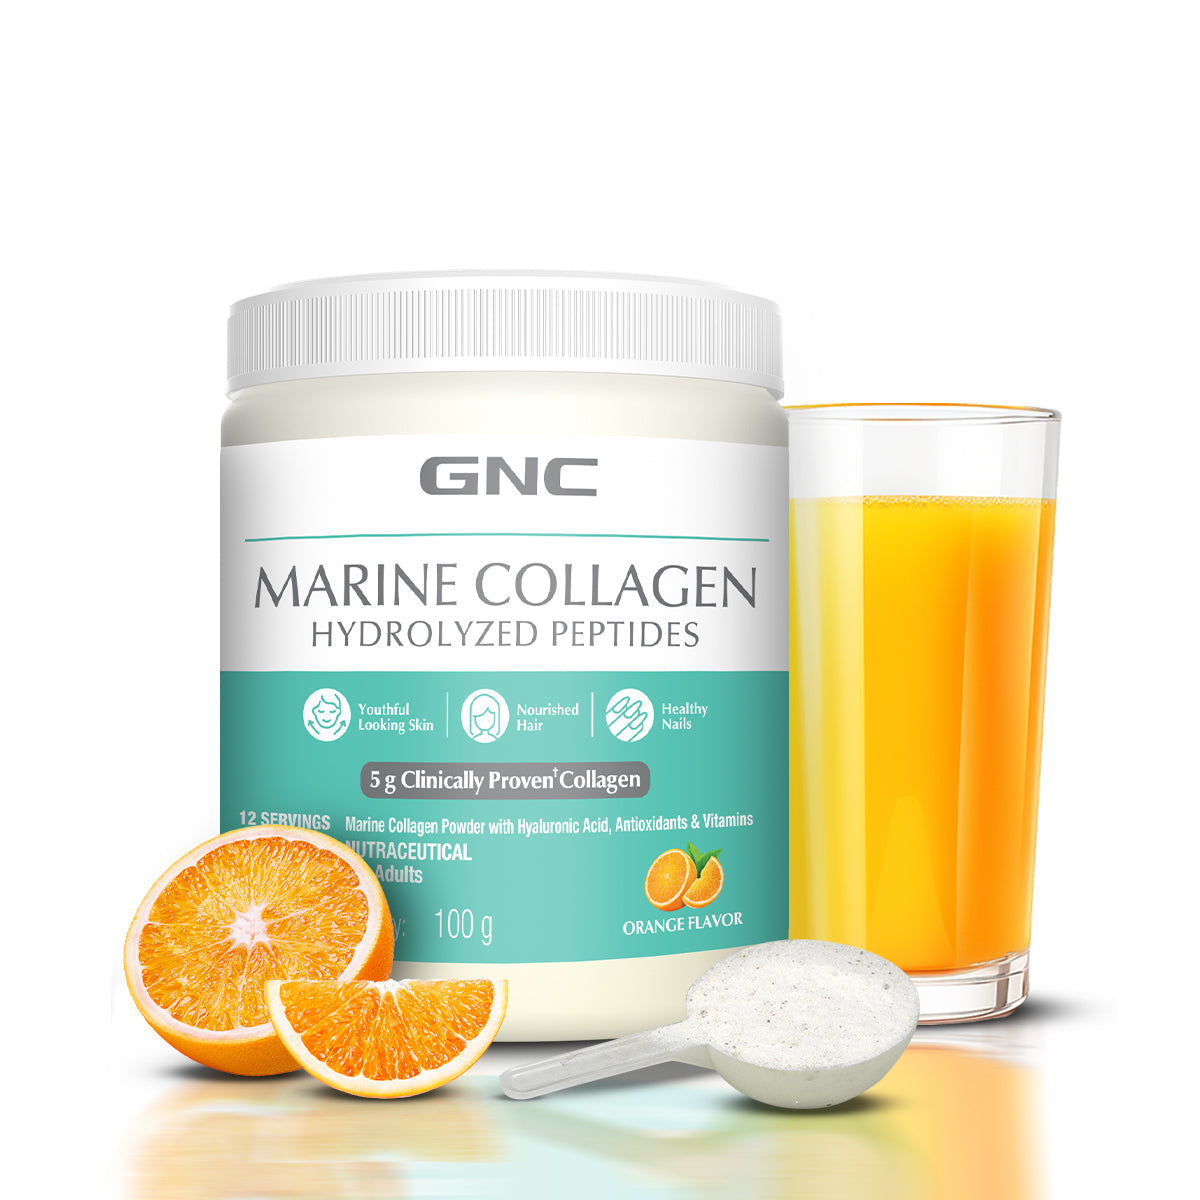 GNC Marine Collagen Hydrolyzed Peptides - Type 1 & 3 Collagen Used To Reduces Fine Lines & Wrinkles For Youthful Skin